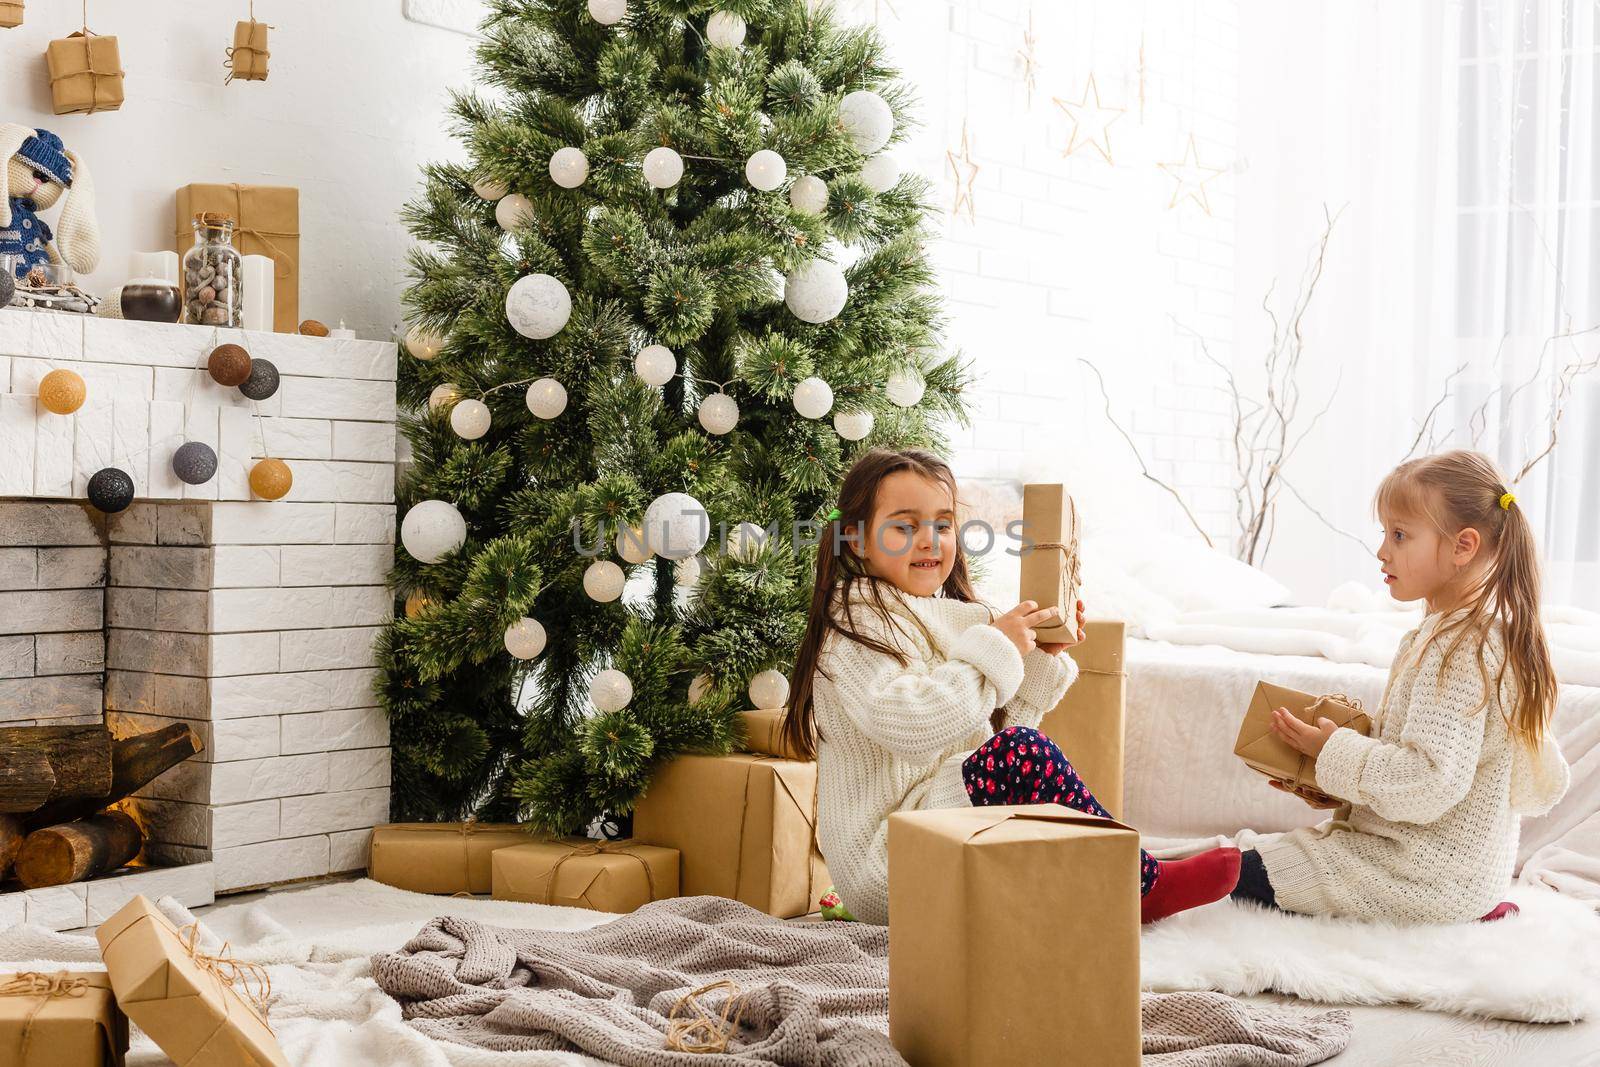 Kids little sisters hold gifts boxes interior background. What a great surprise. Small cute girls received holiday gifts. Best toys and christmas gifts. Children friends excited unpacking their gifts.